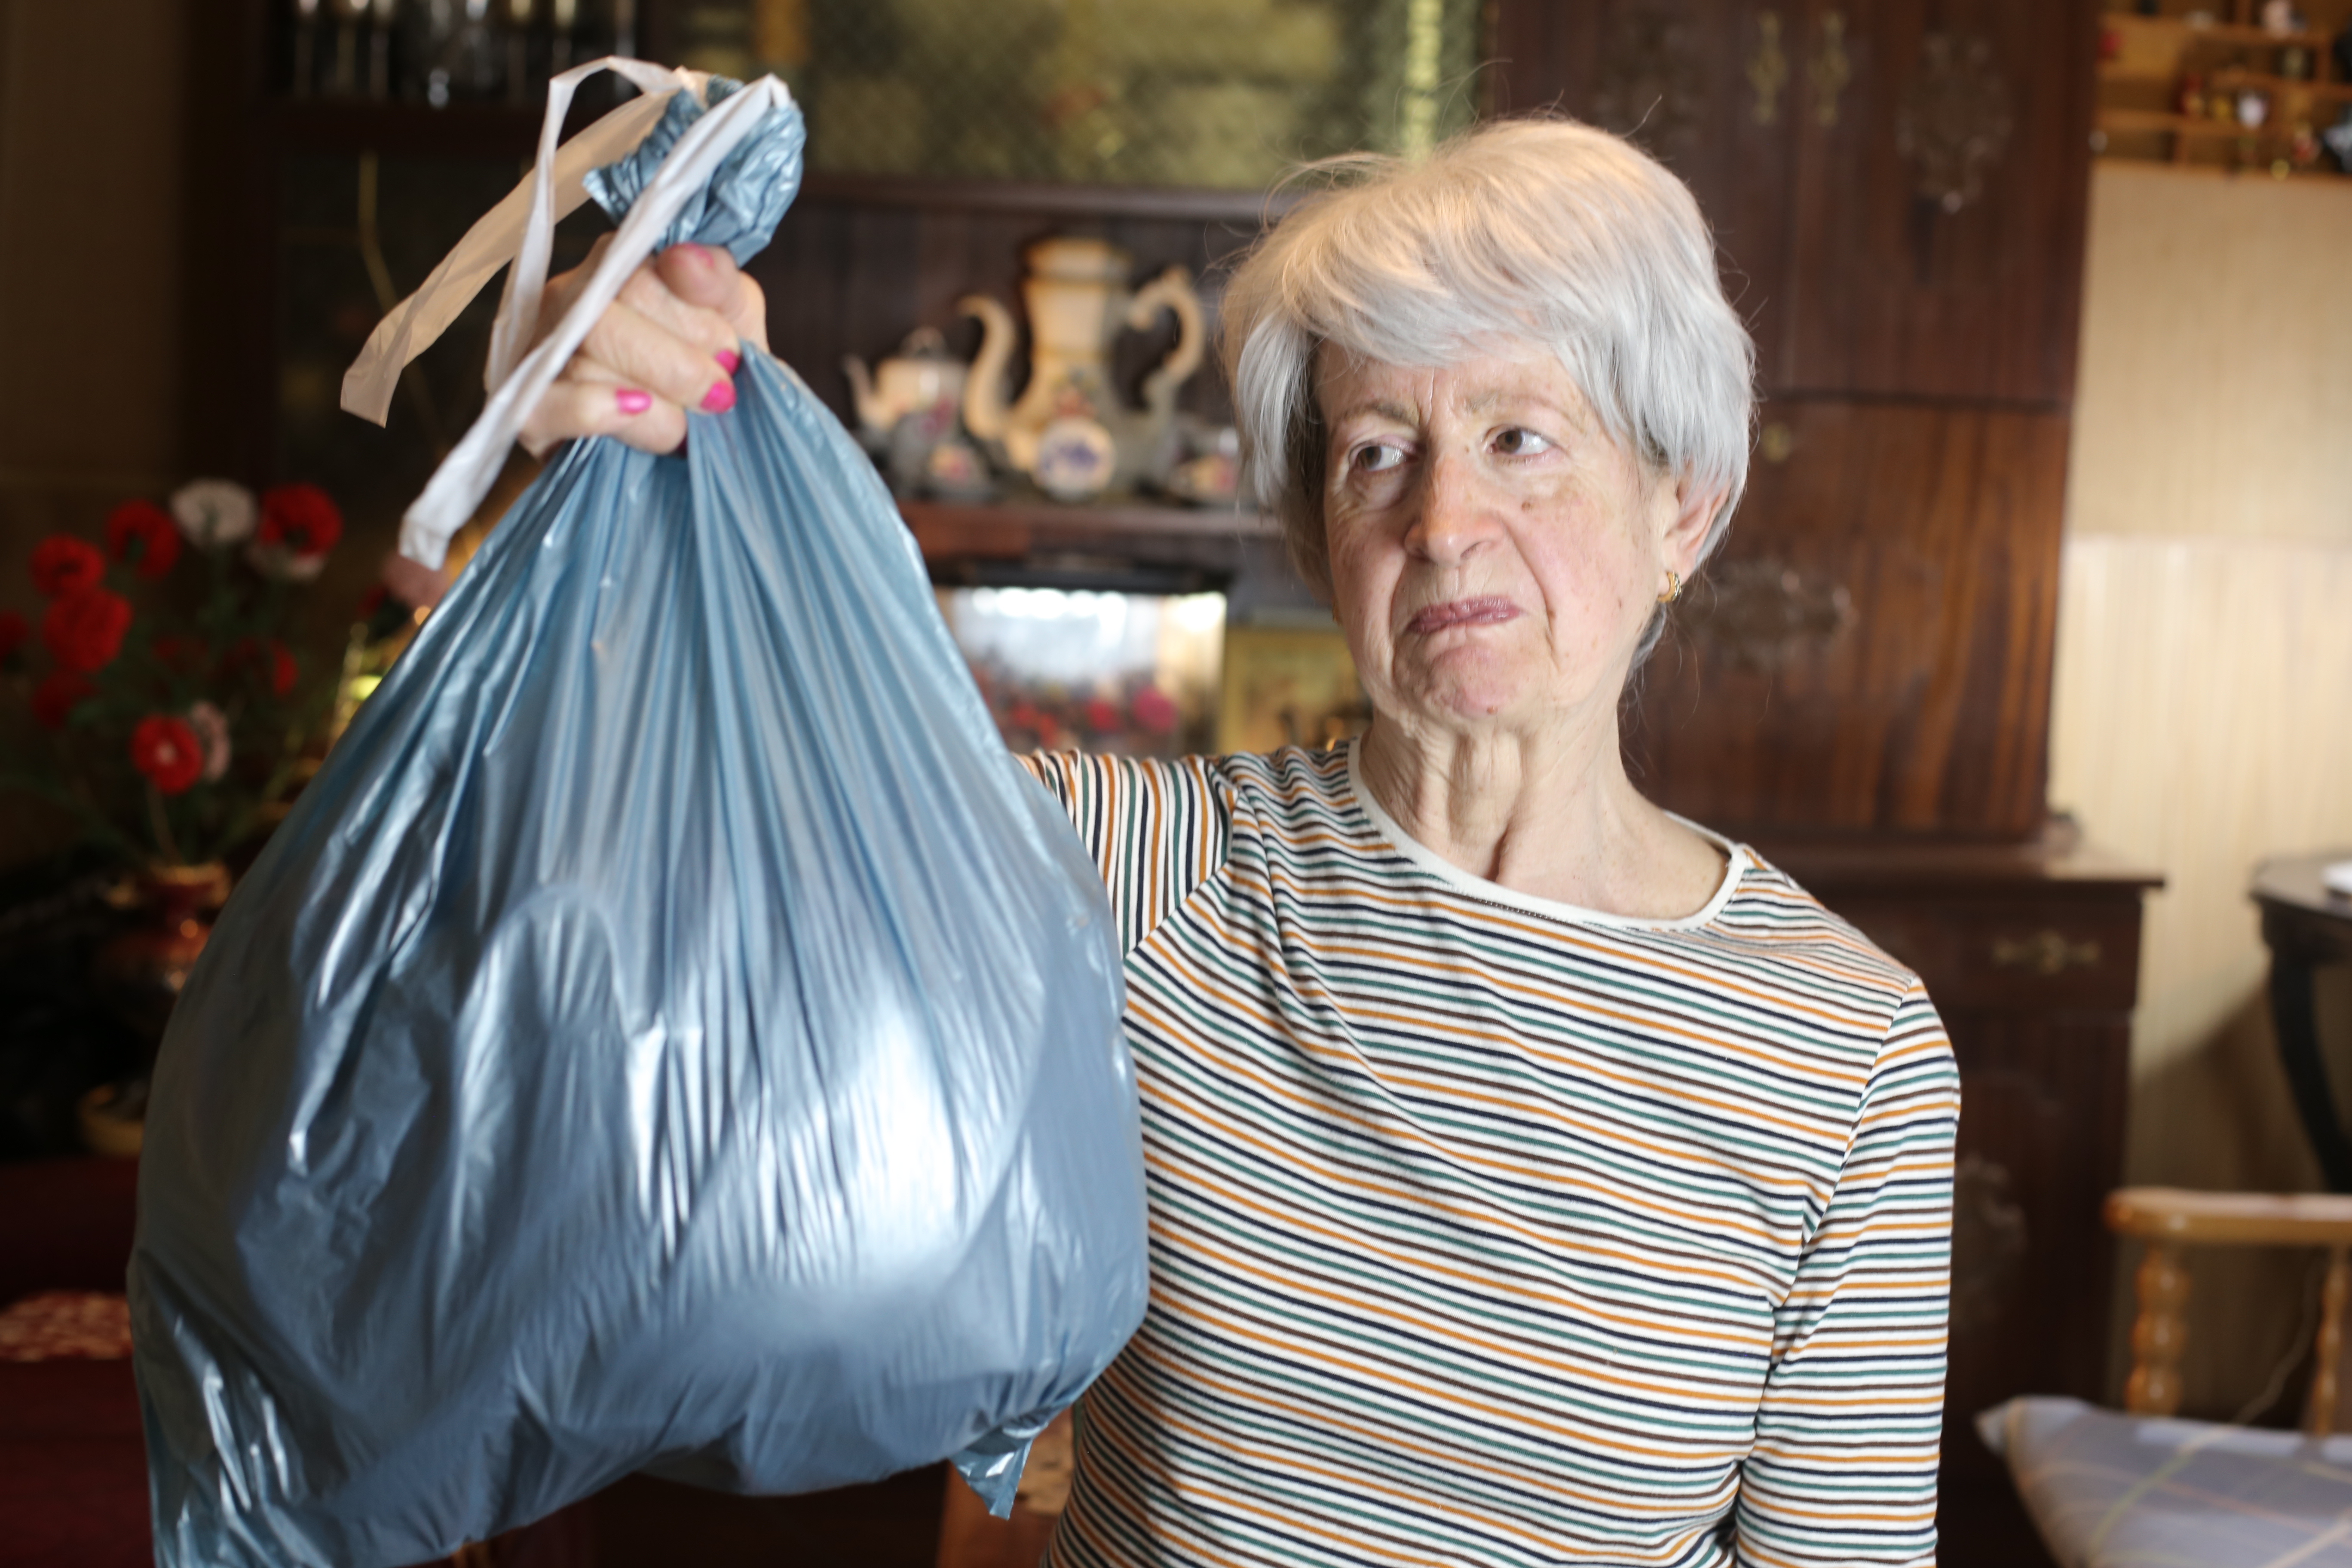 Senior woman holding a garbage bag | Source: Getty Images